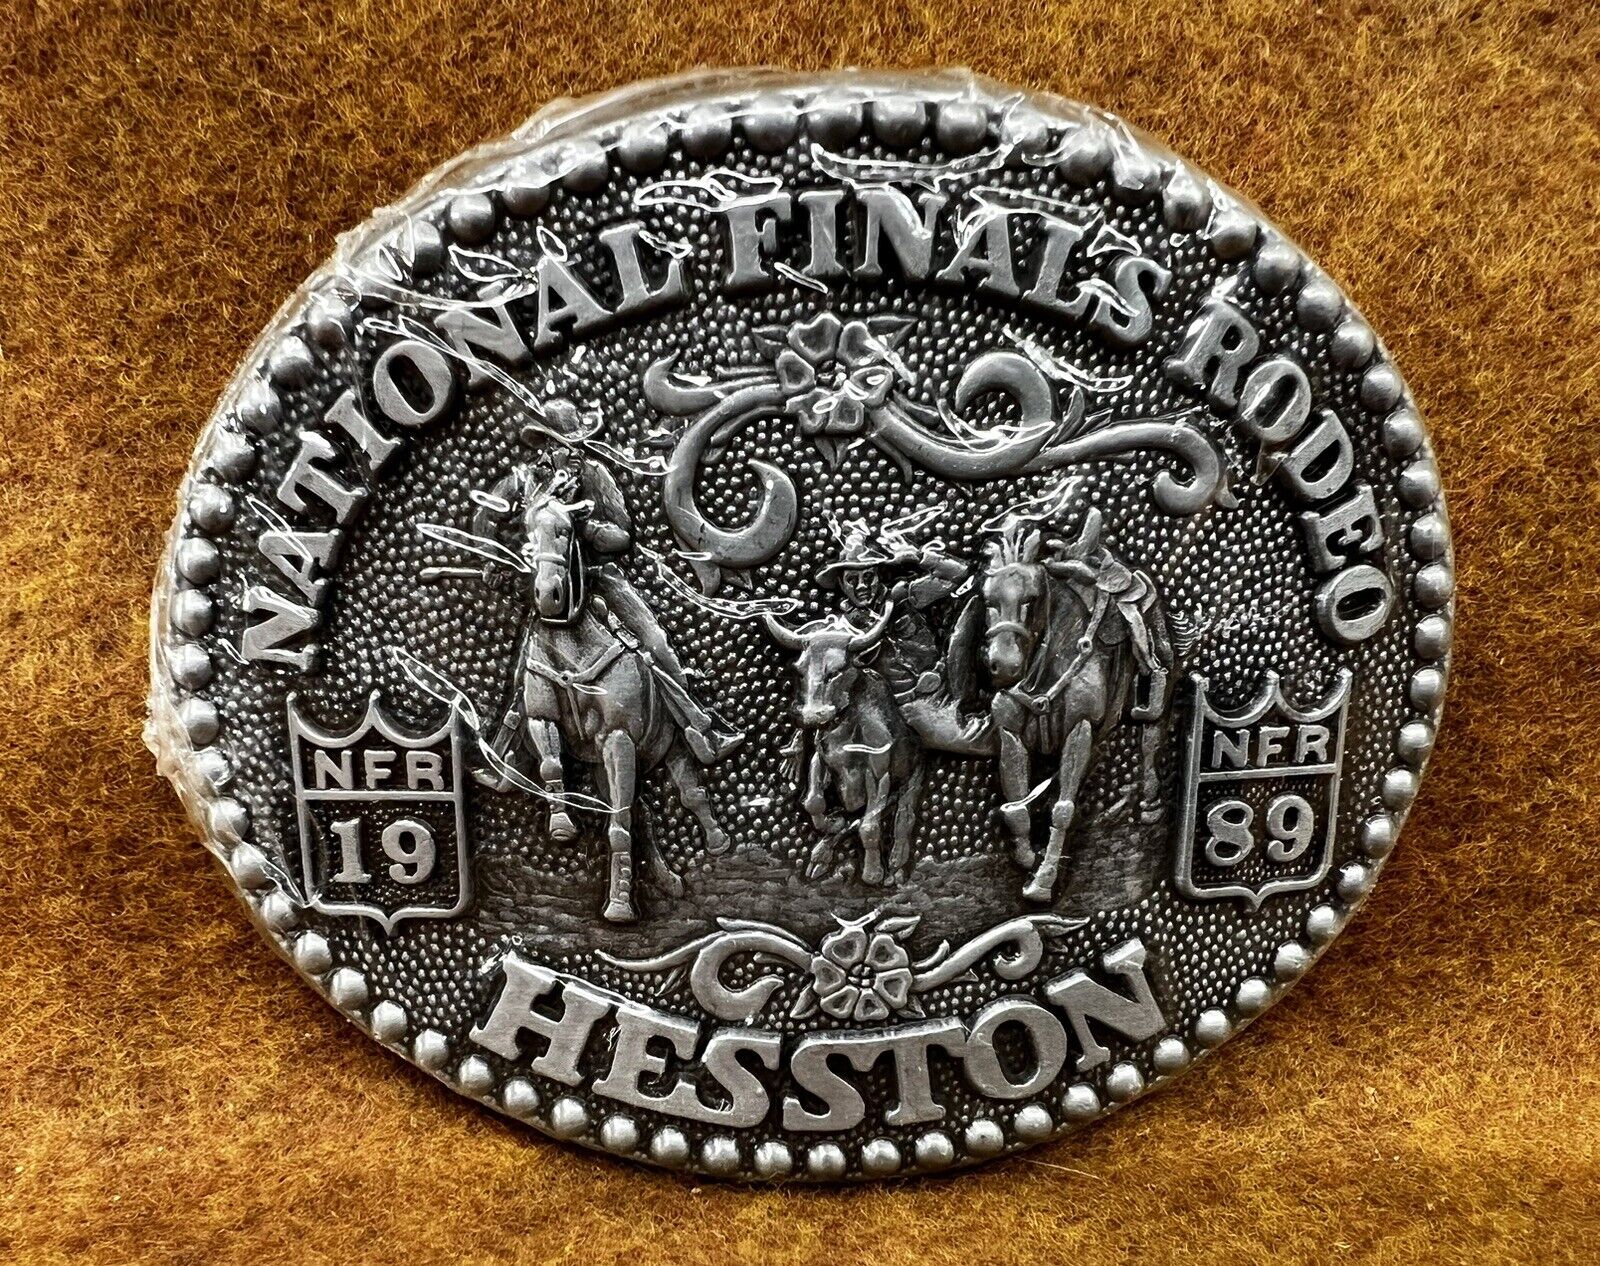 1989 Hesston National Finals Rodeo Belt Buckle NFR BRAND NEW SEALED